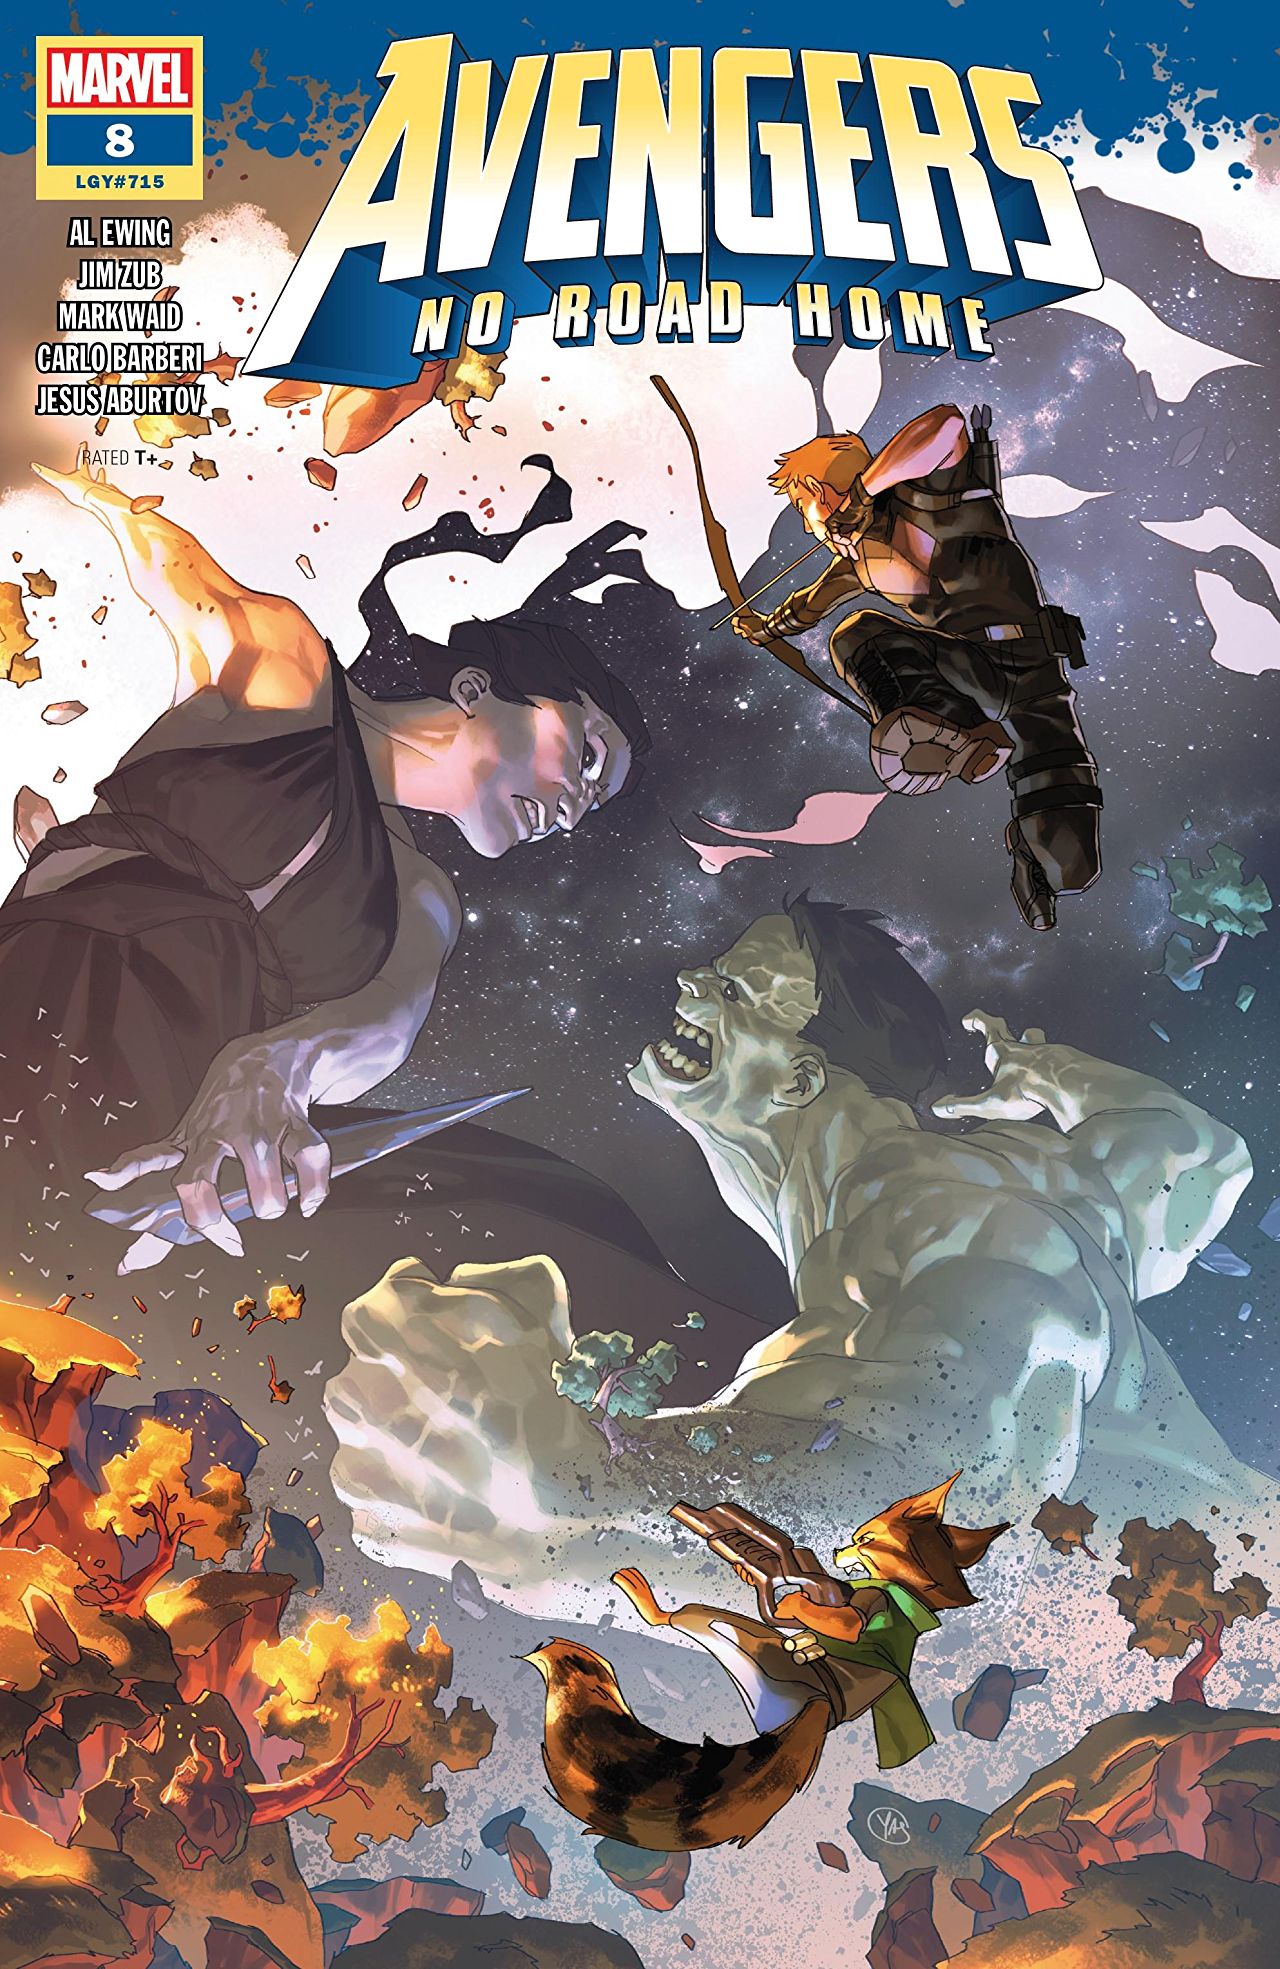 Marvel Preview: Avengers: No Road Home #8